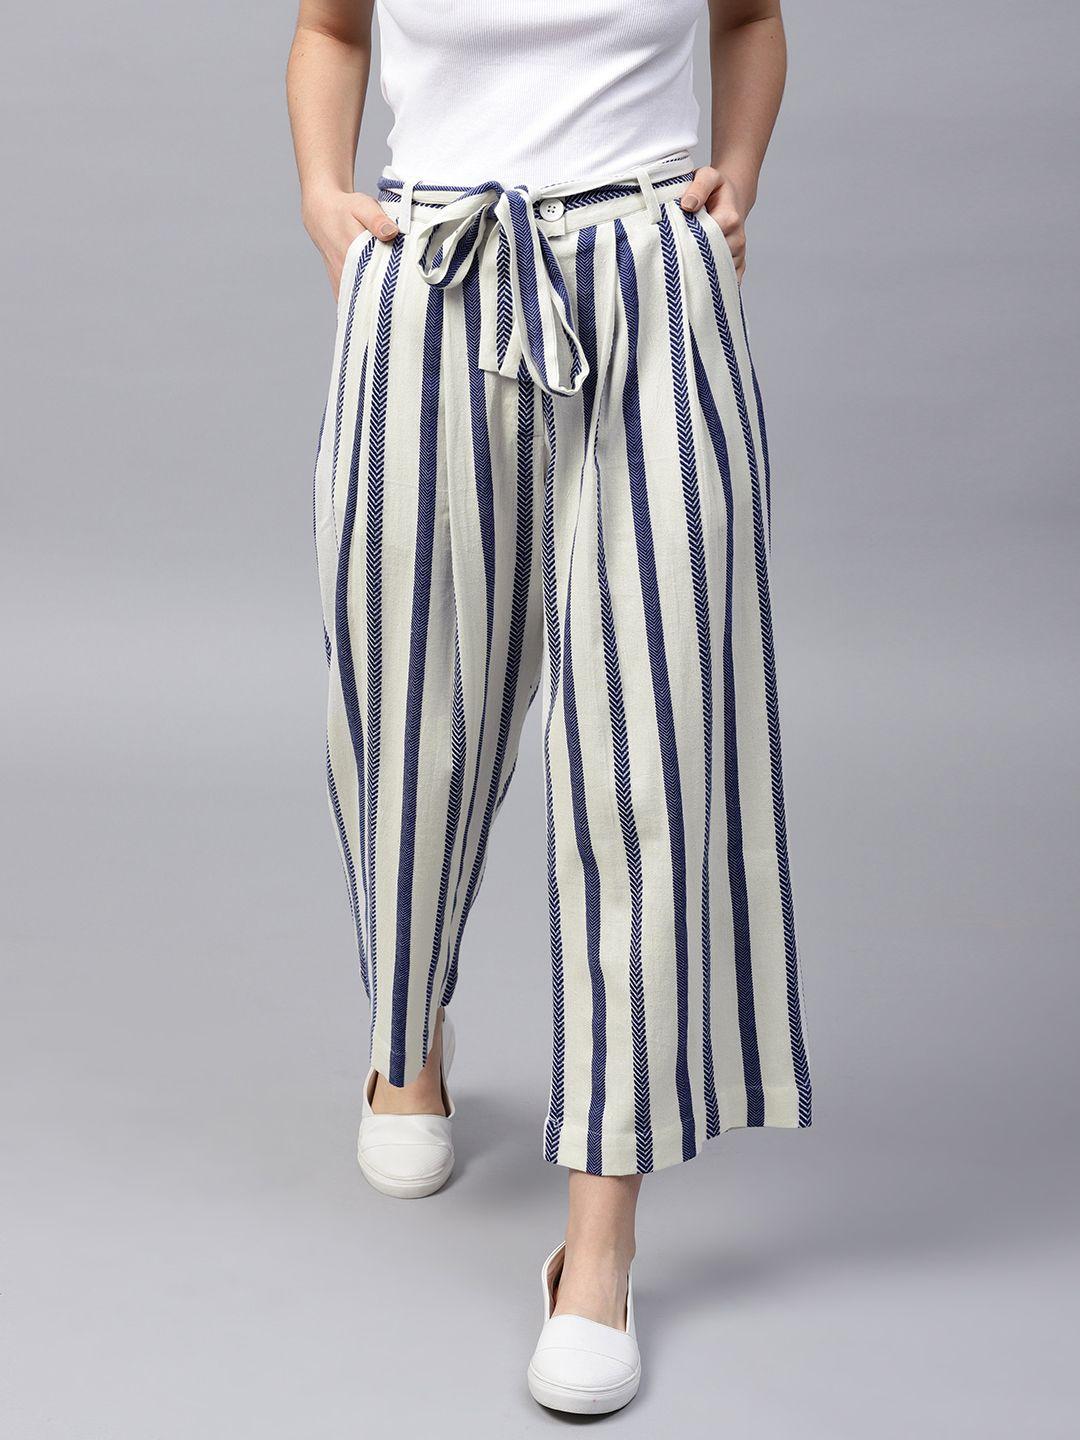 street-9-women-white-&-navy-blue-loose-fit-striped-culottes